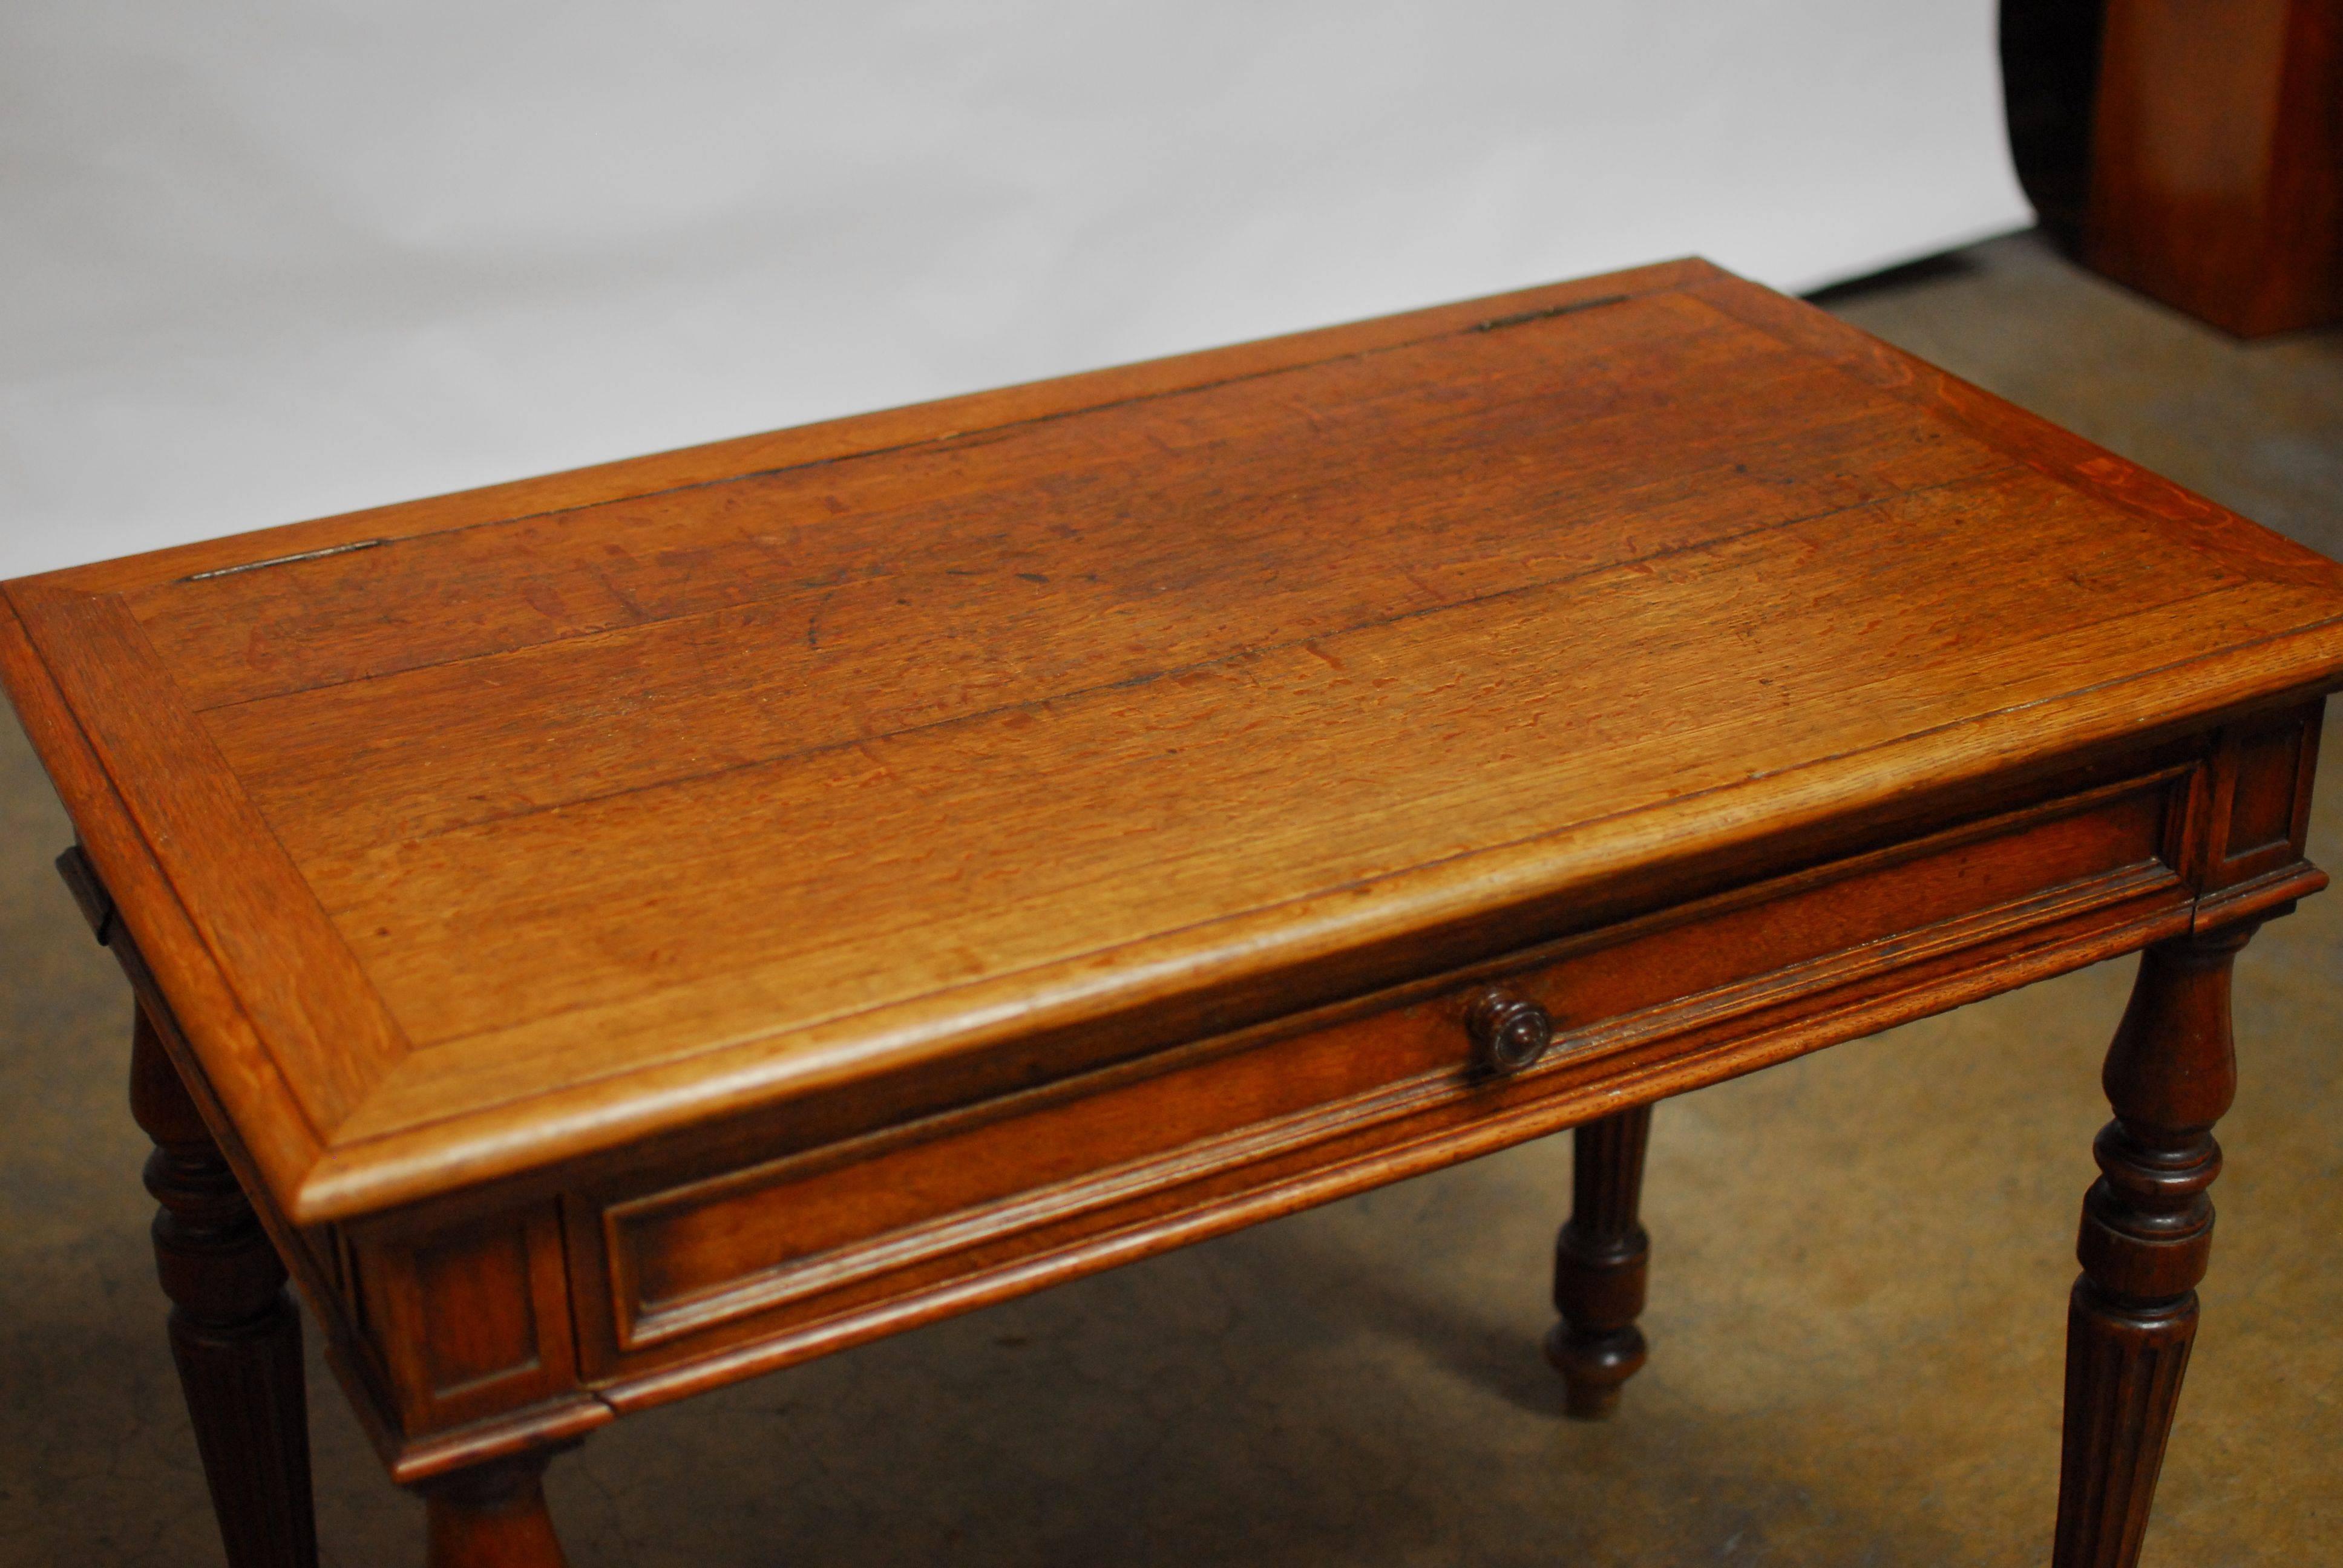 Wood 19th Century English Desk with Folding Privacy Walls